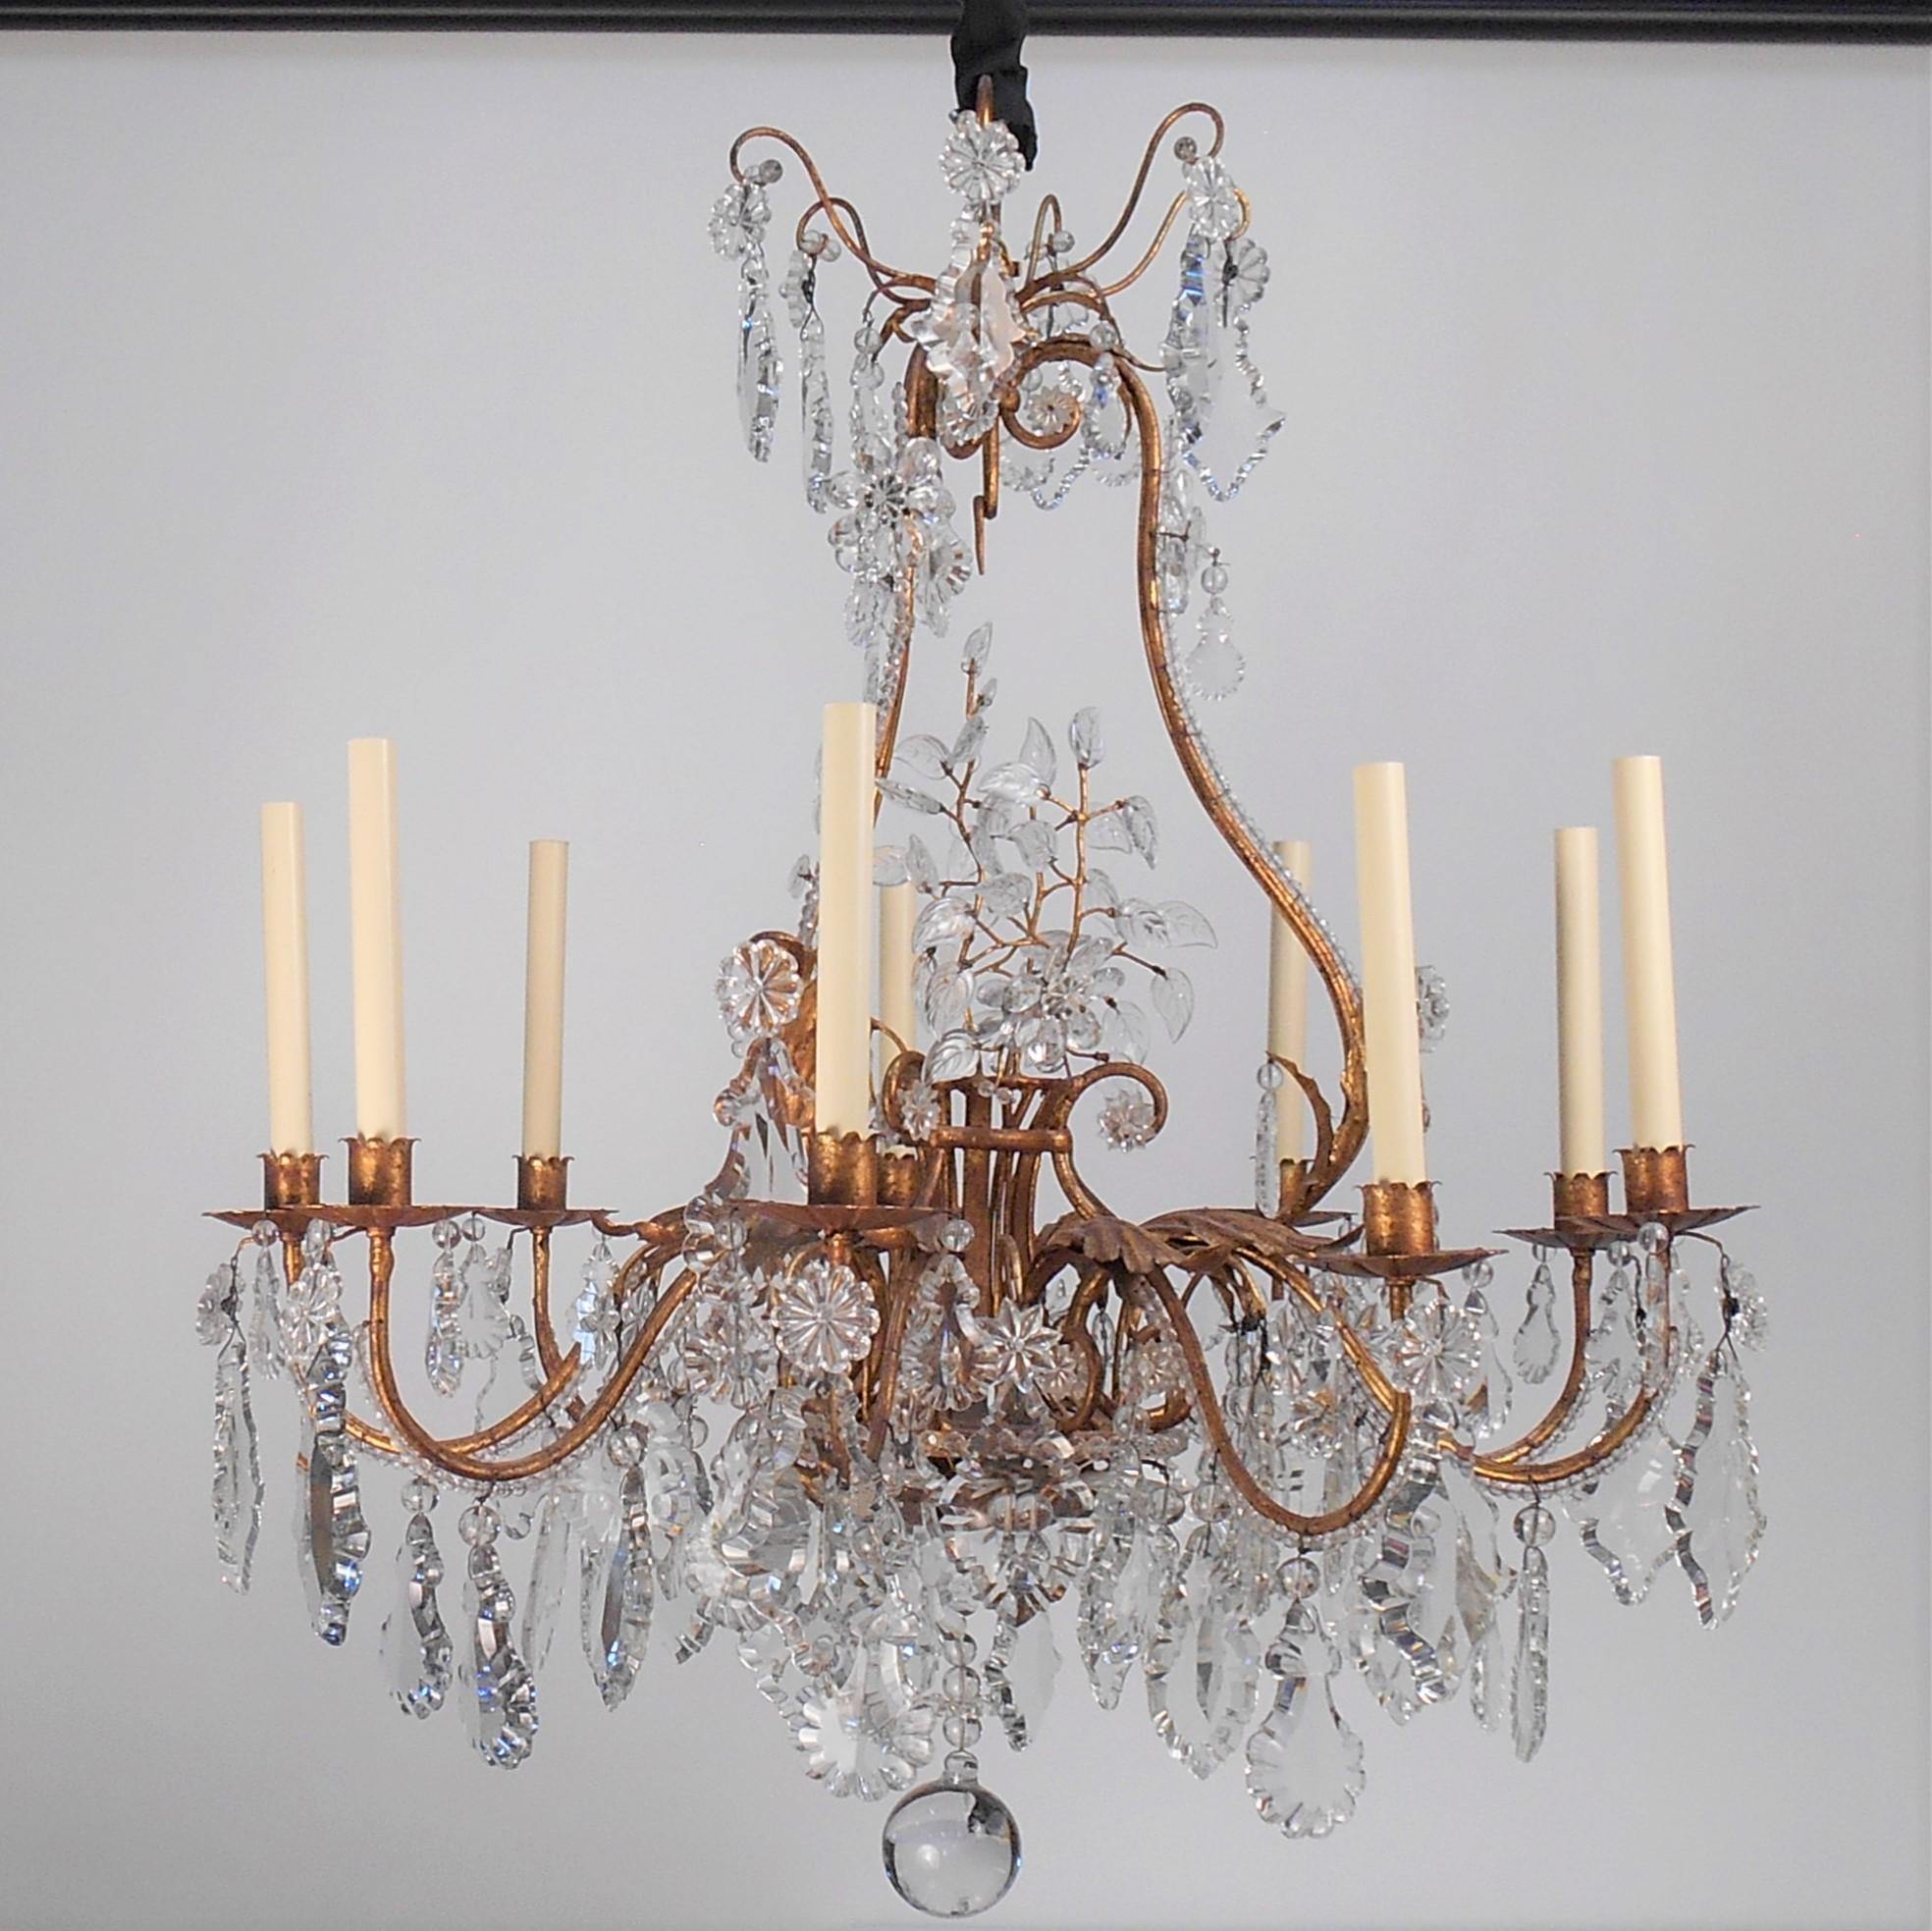 This iron, tole leaf and crystal chandelier feature intricately detailed crystal leaves, rosettes, beading and multiple shaped pendalogues. The tole finish is a rich heavily antiqued gold leaf with a patina equaling that of an 18th or 19th century